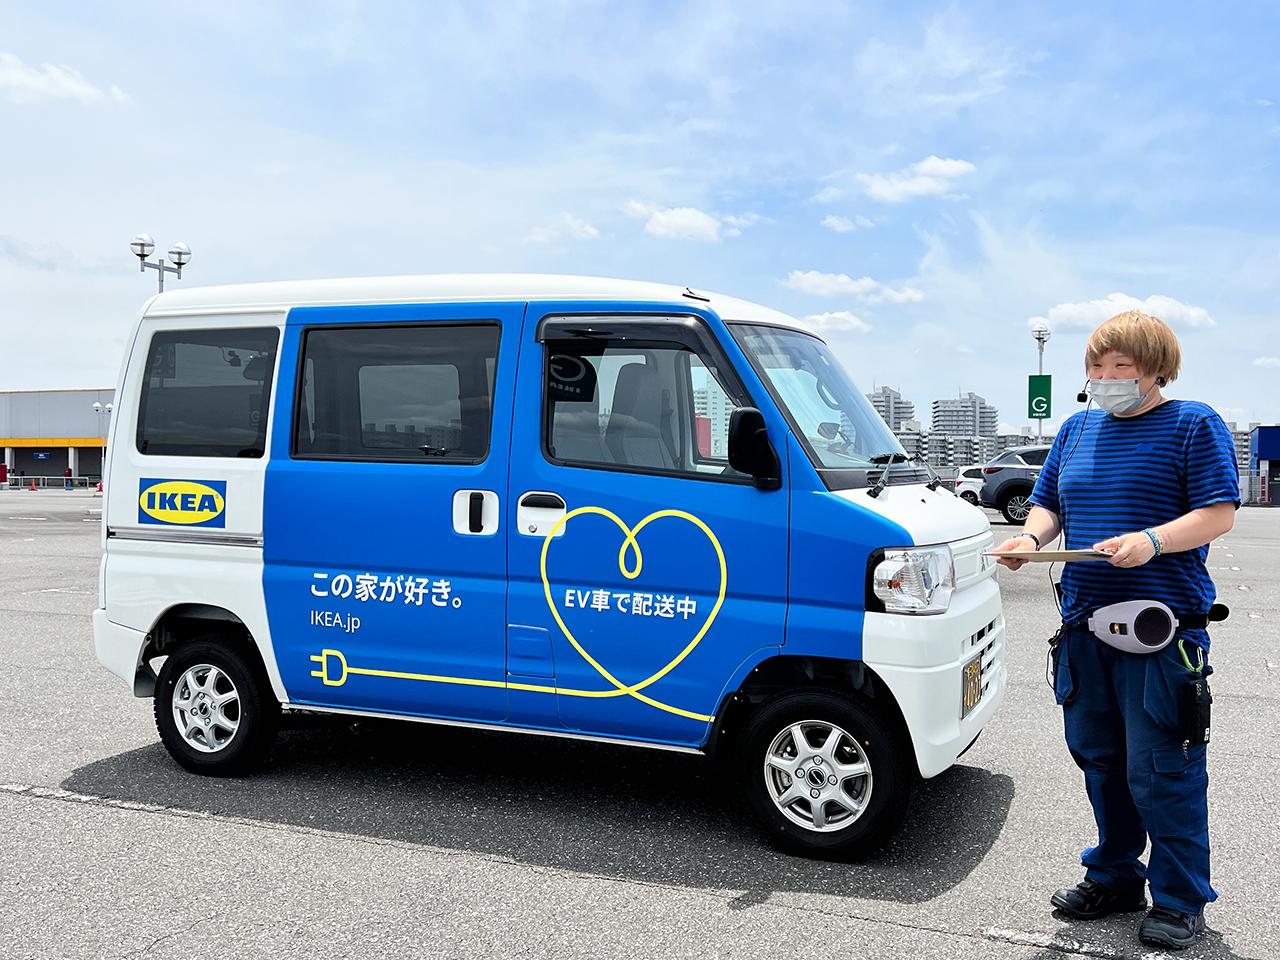 IKEA aims to achieve zero emissions (zero CO2 emissions) in the last mile* by 2025. Therefore, the plan is to use 100% EVs for last-mile transportation.